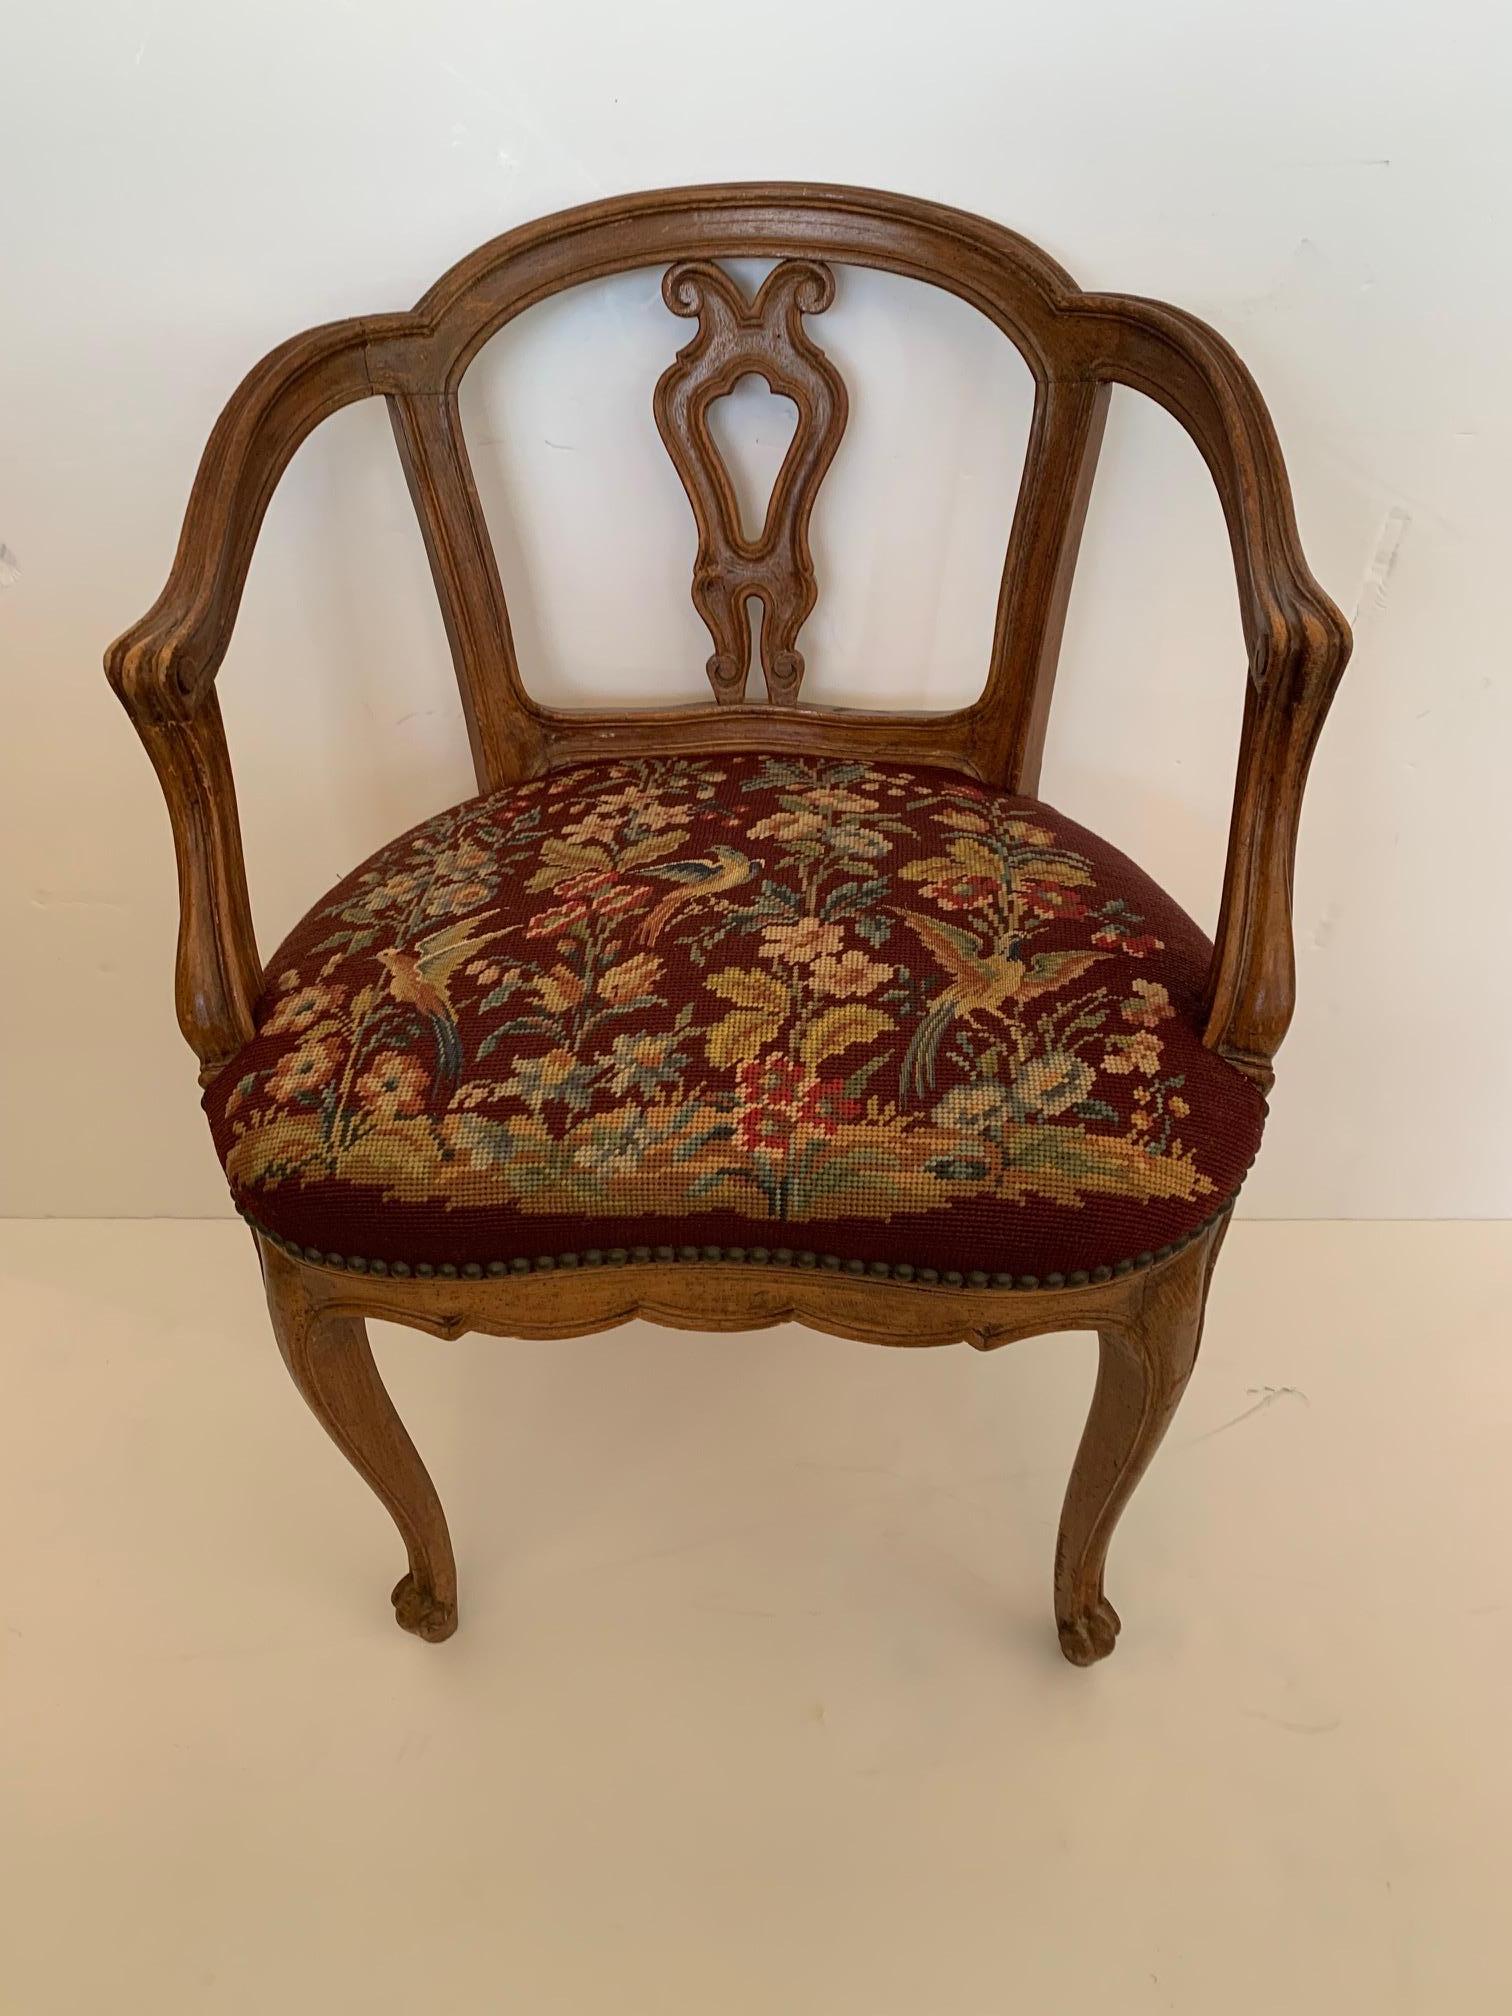 Lovely antique French carved walnut occasional chair having cabriole legs and hand made pettipoint needlepoint seat with maroon background, lovely birds and foliage.
Measures: arm height 24.
Seat D 17.